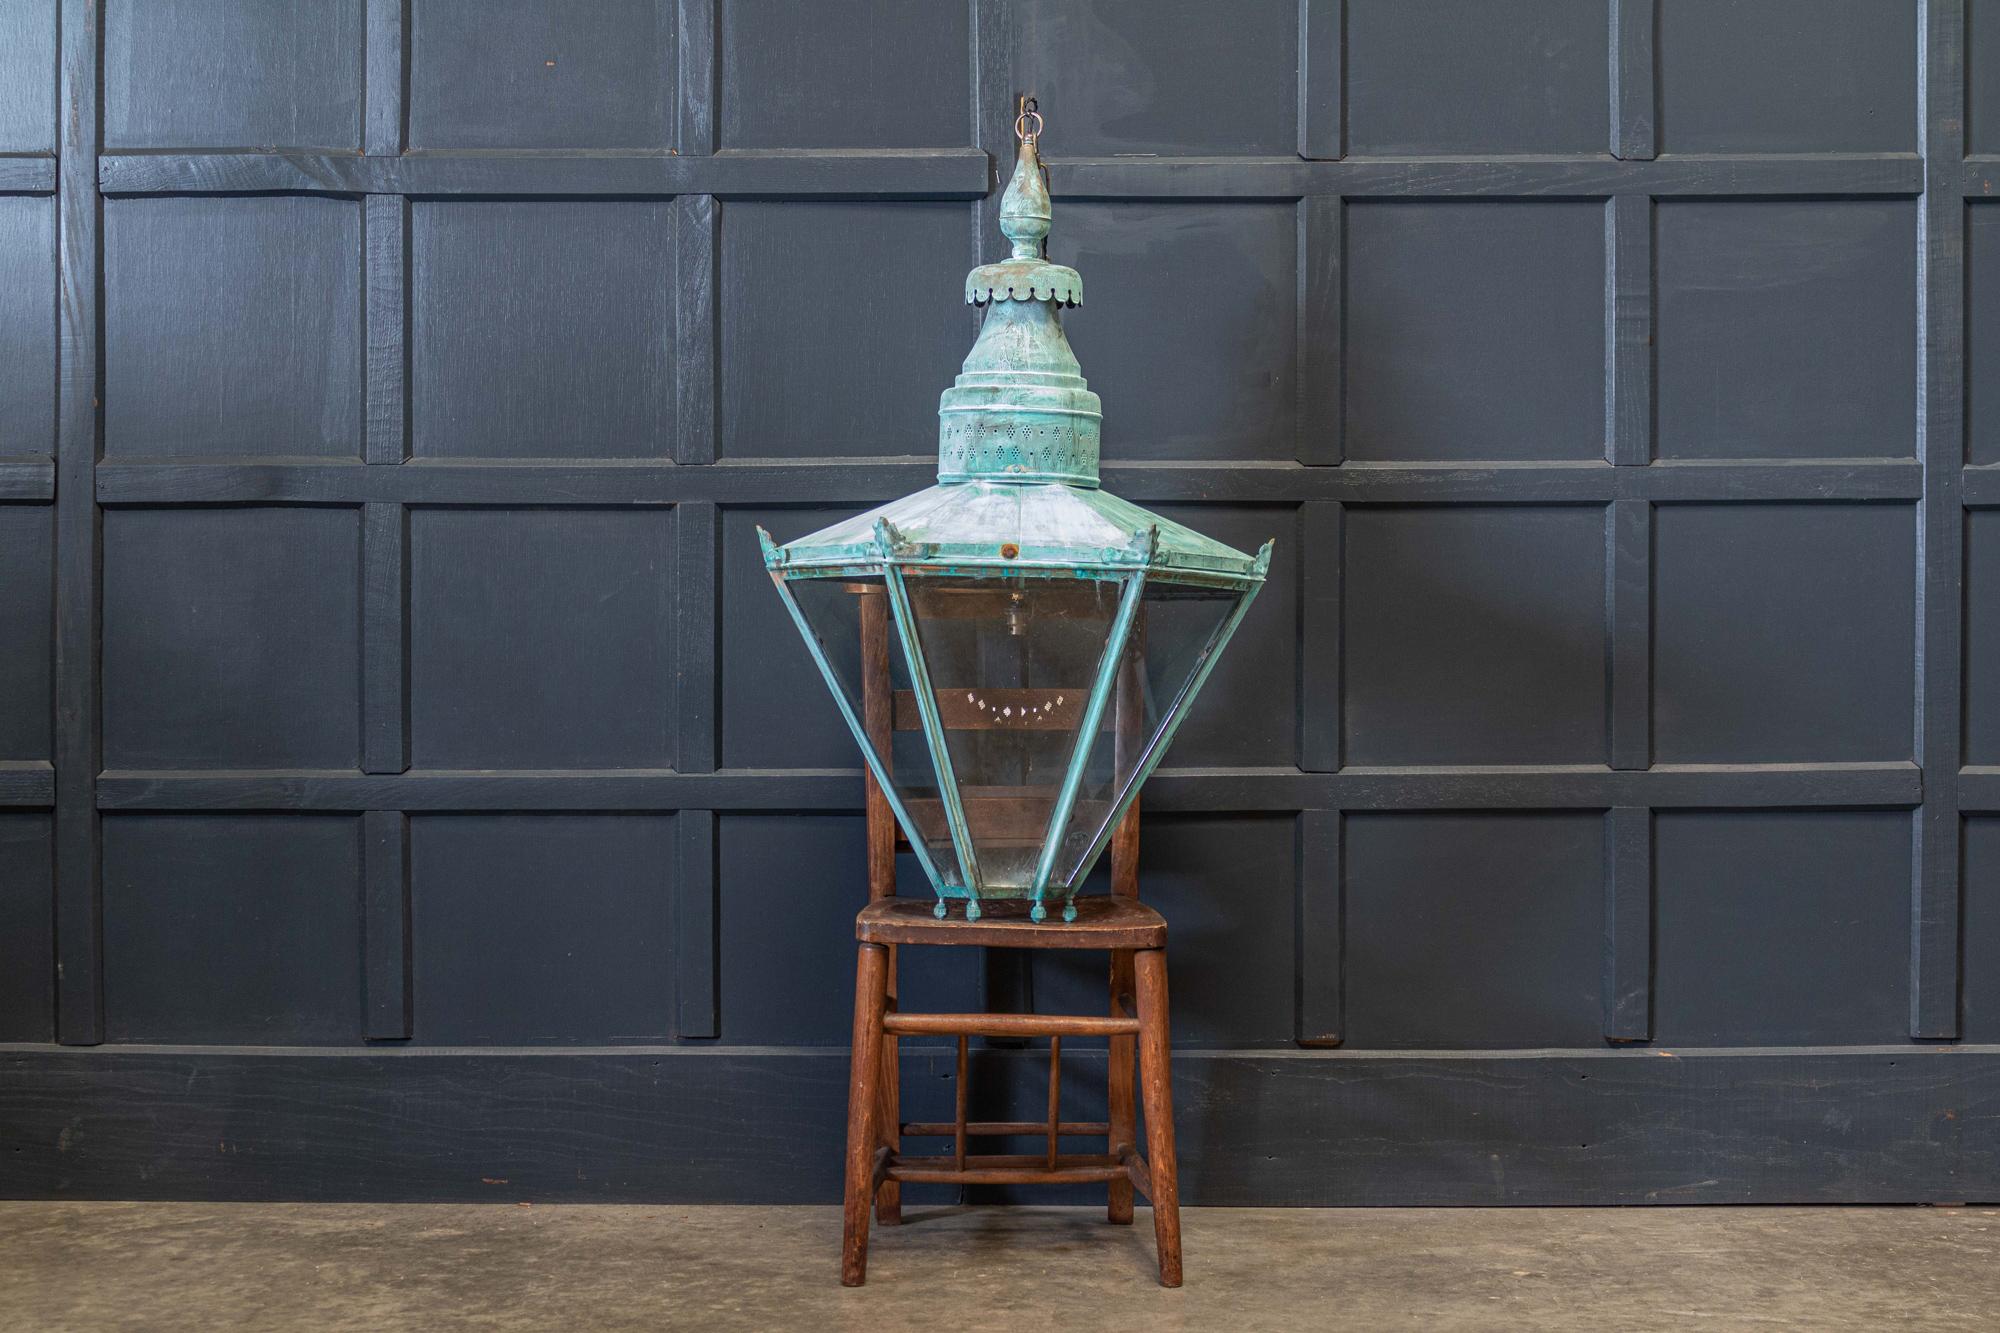 Circa 1950's

Large English Hexagonal Verdigris Lantern

Glazed hinged door with excellent decorative colour, comes with 1m of silk flex, 1m of heavy gauge antique brass chain & bronze ceiling hook.

Glazed rewired & pat tested - ready to